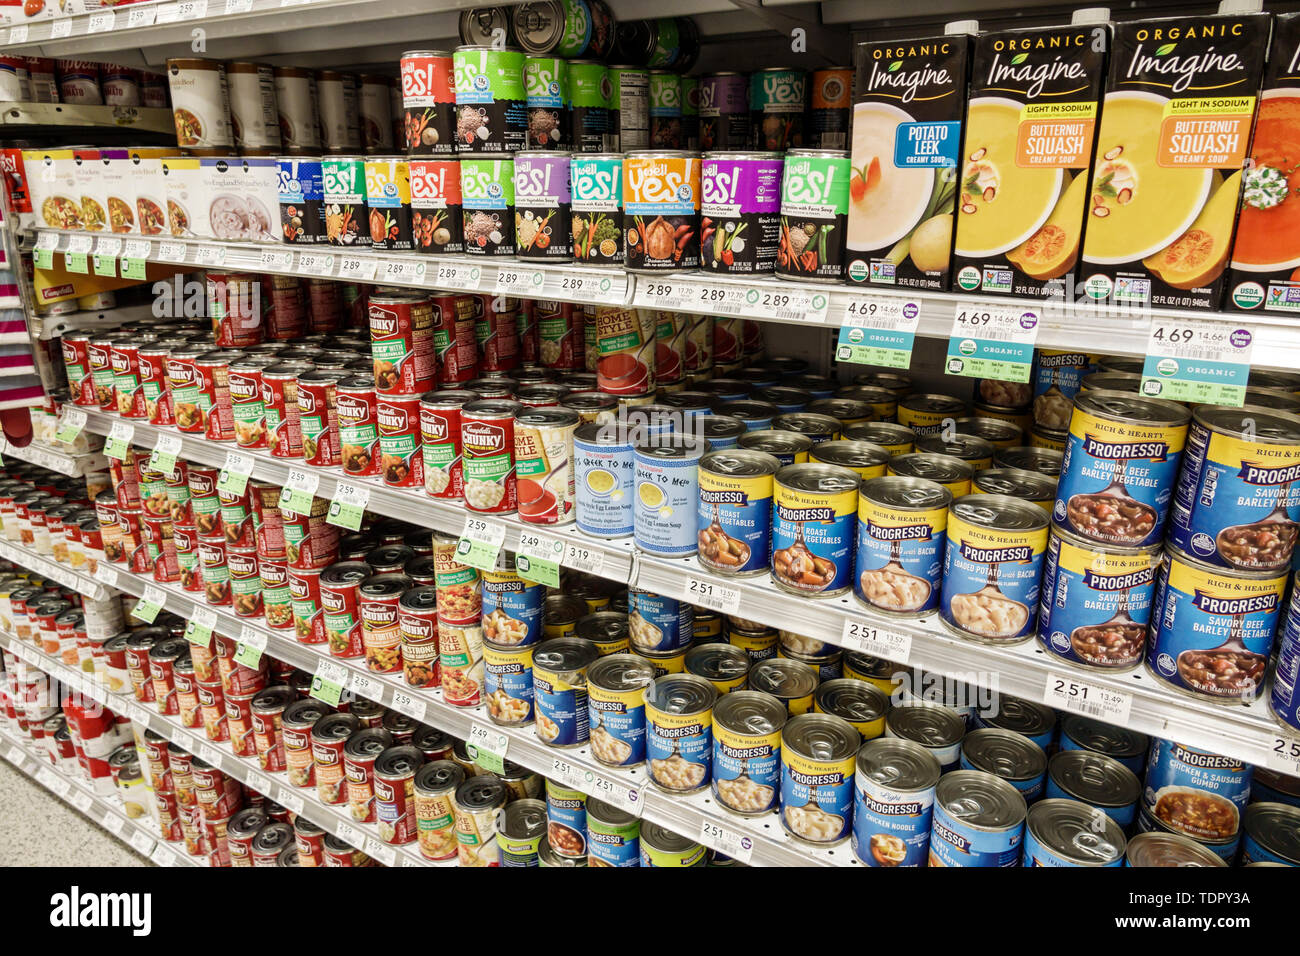 Miami Beach,North Beach,Publix,grocery store supermarket,inside interior,display sale,soup cans,Progresso,Campbell Chunky,organic,cartons,shelf shelve Stock Photo